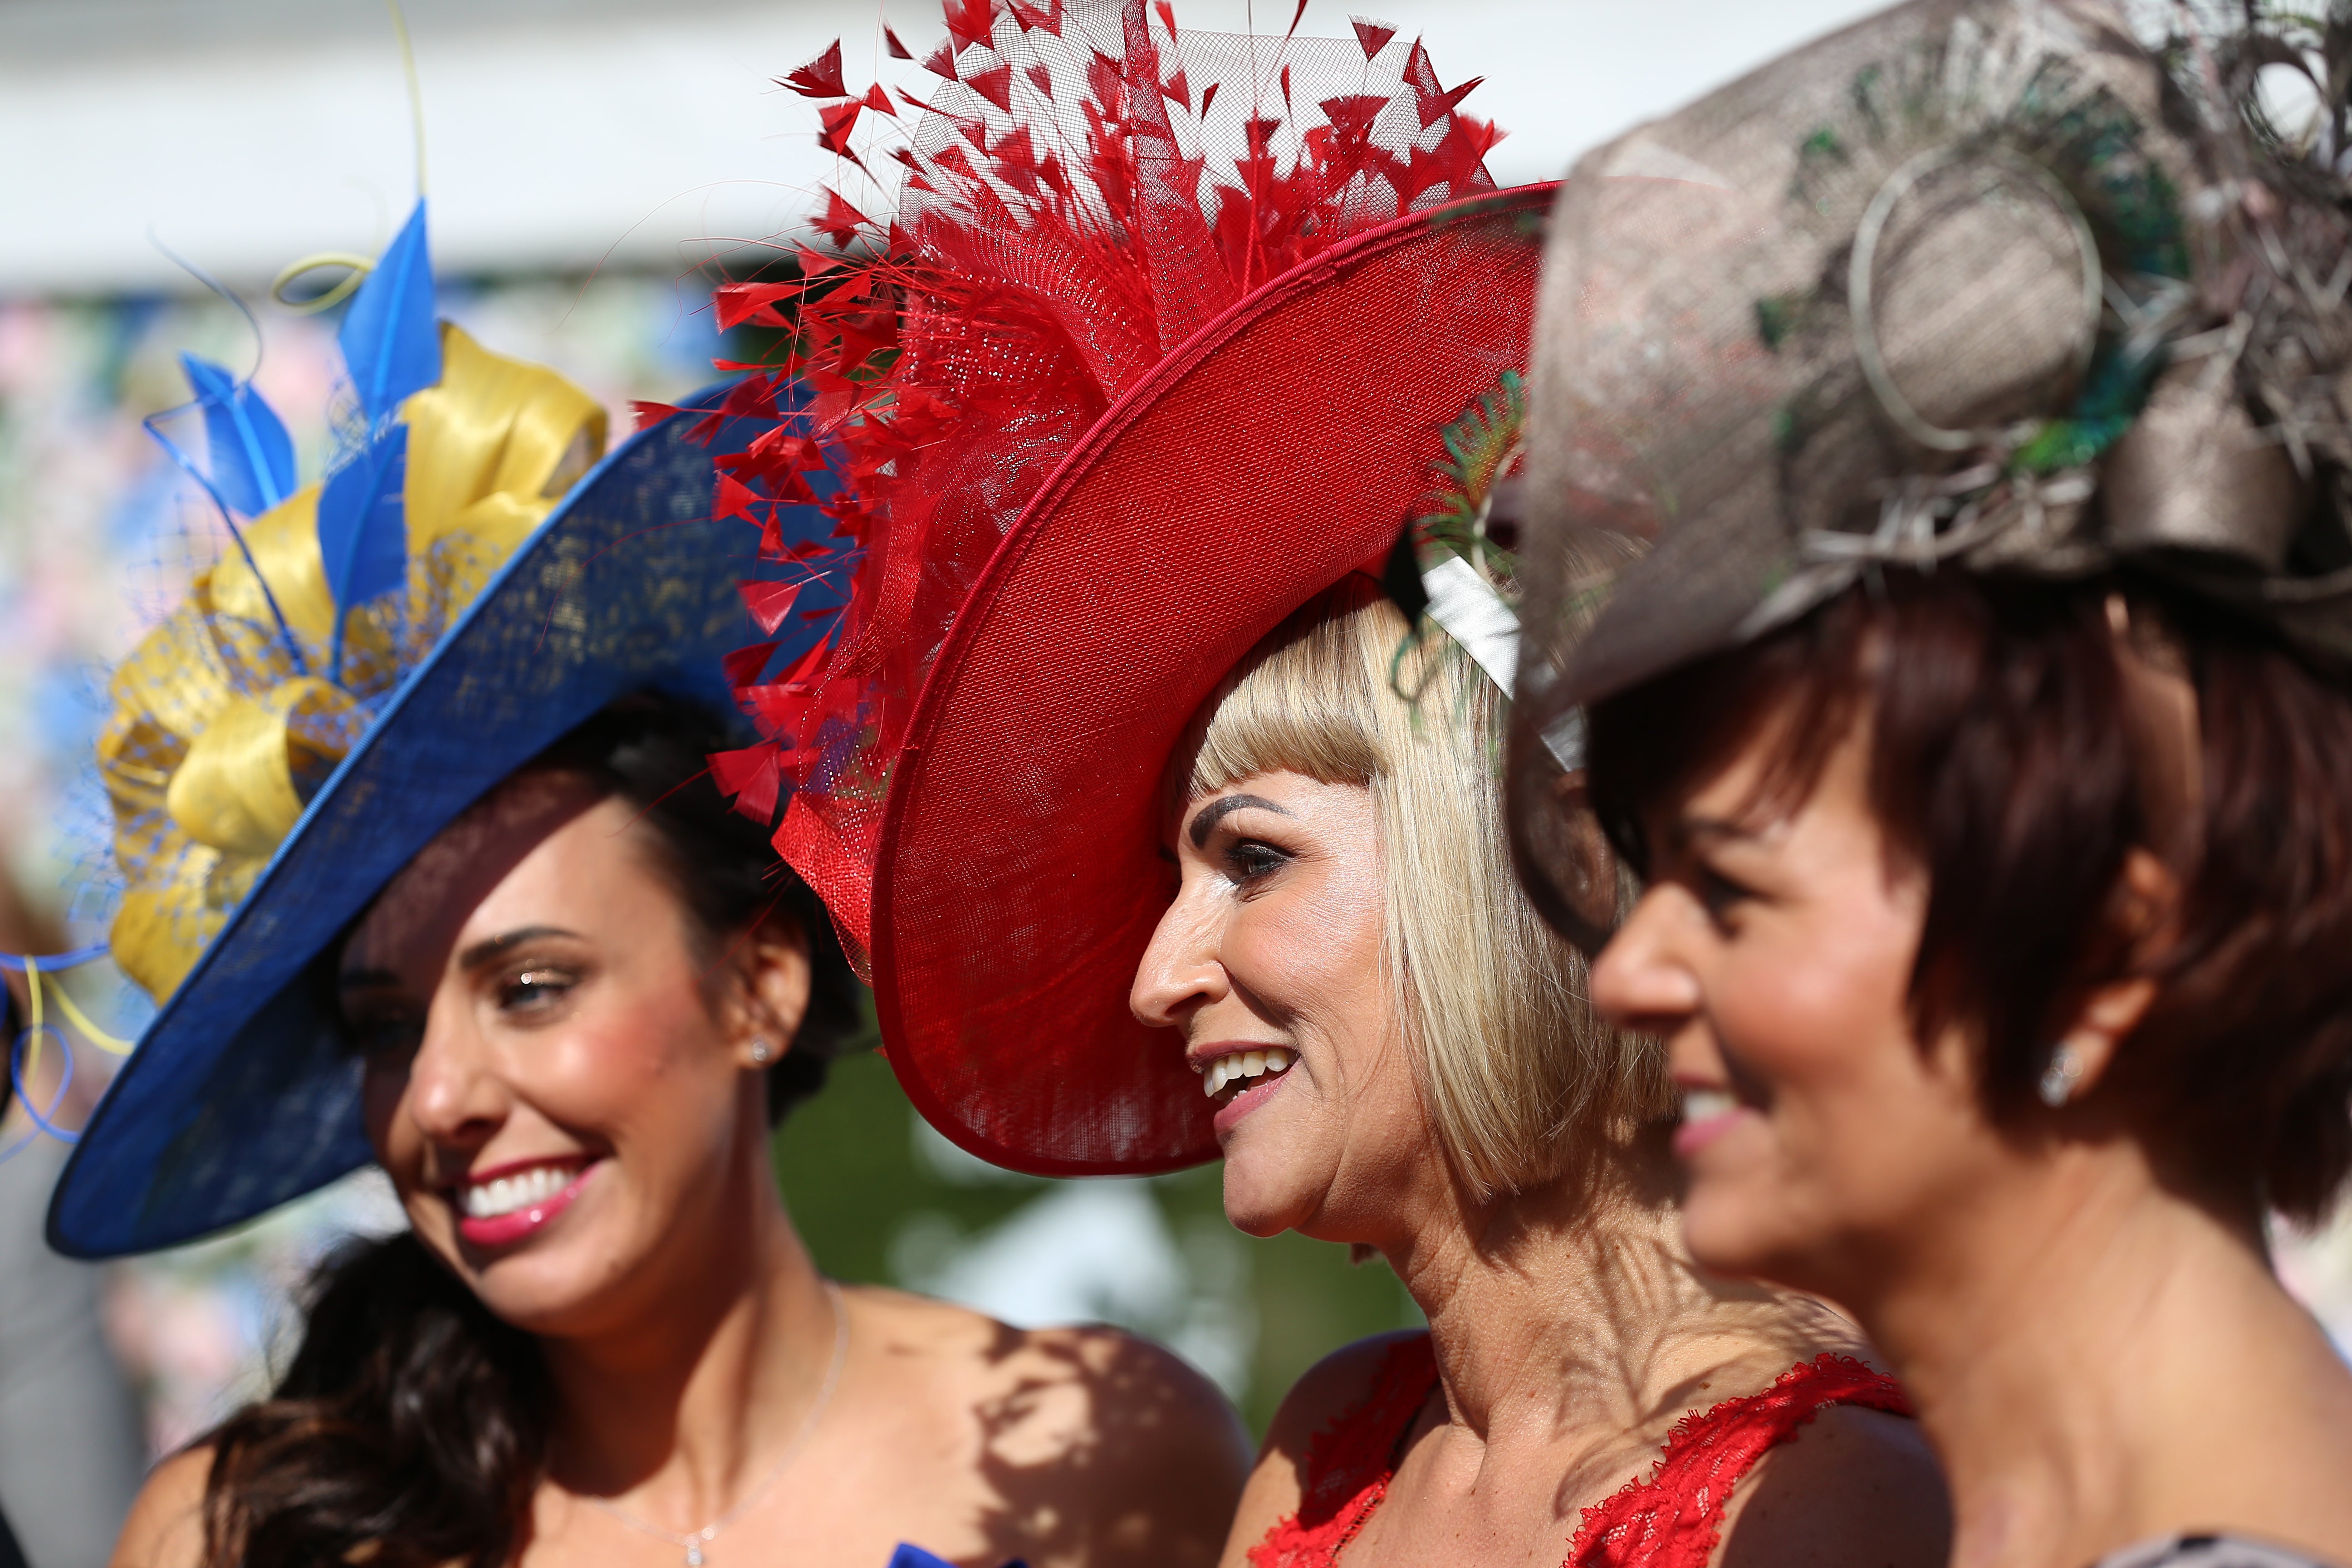 Claire Dixon, Tracey Allen and Rachael Sherwen at Aintree’s Ladies Day (Nigel French/PA)